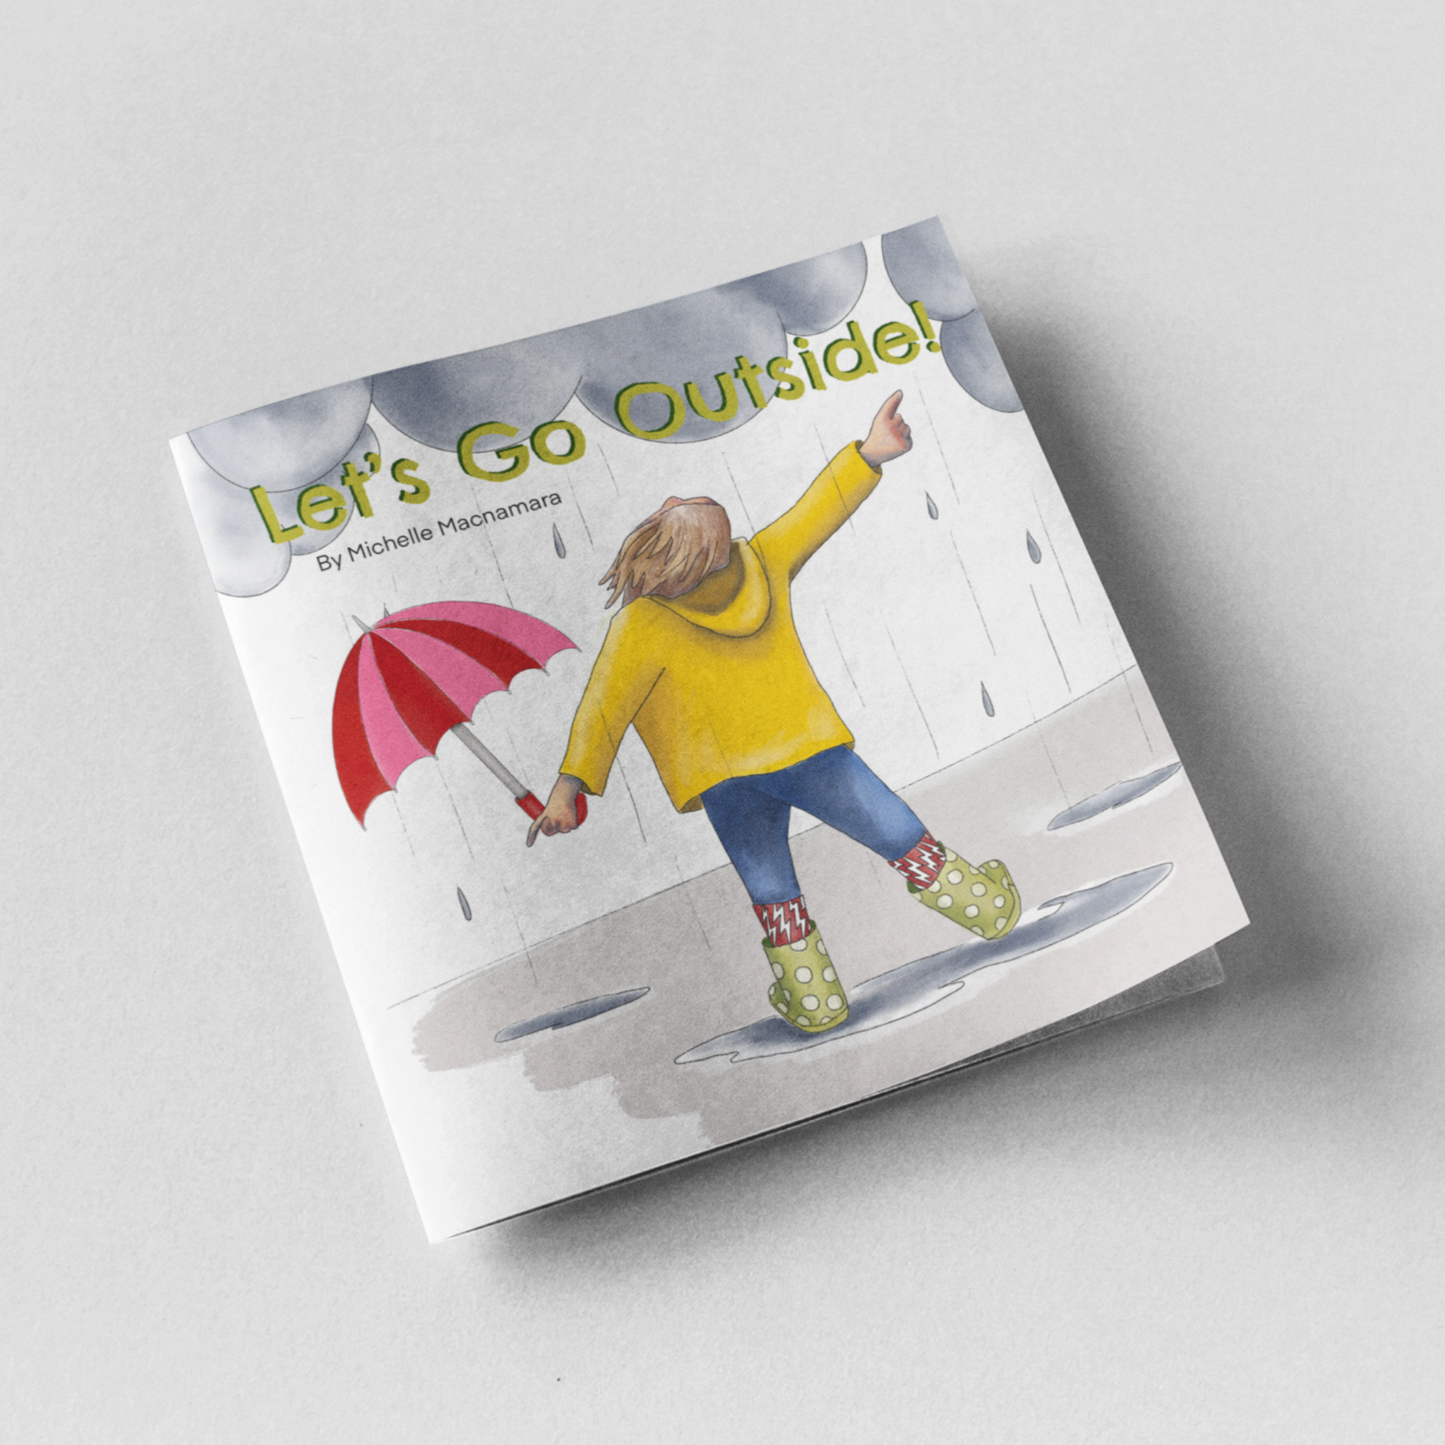 Paperback book on grey background, a rainy stormy day story called, Let’s Go Outside! by Australian Artist + Author Michelle Macnamara